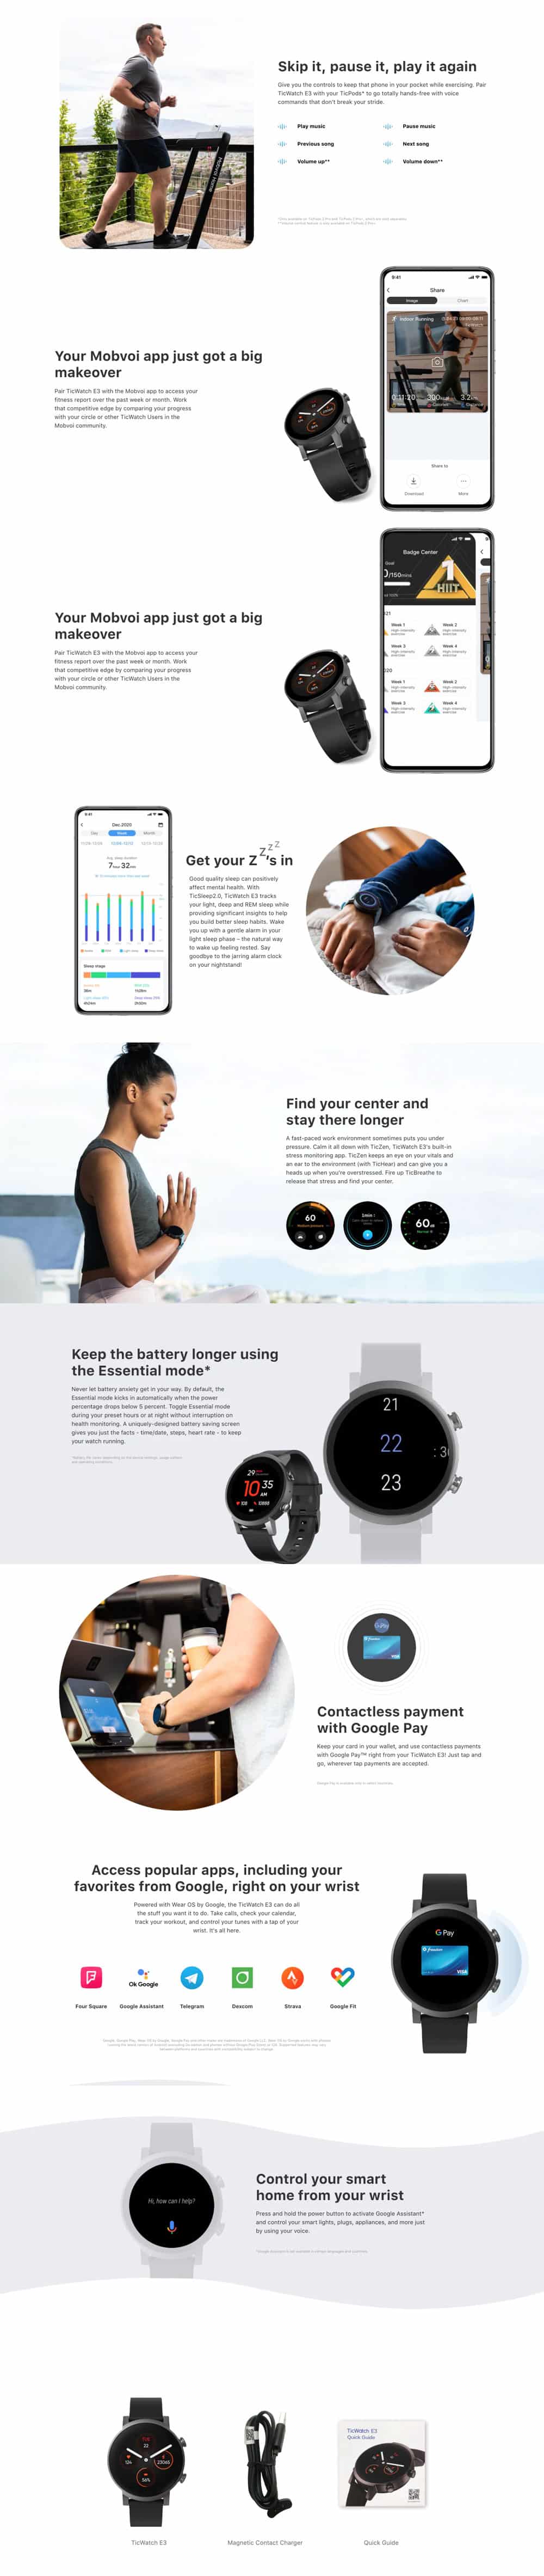 TicWatch E3 Android Wear OS Smart Watch 8